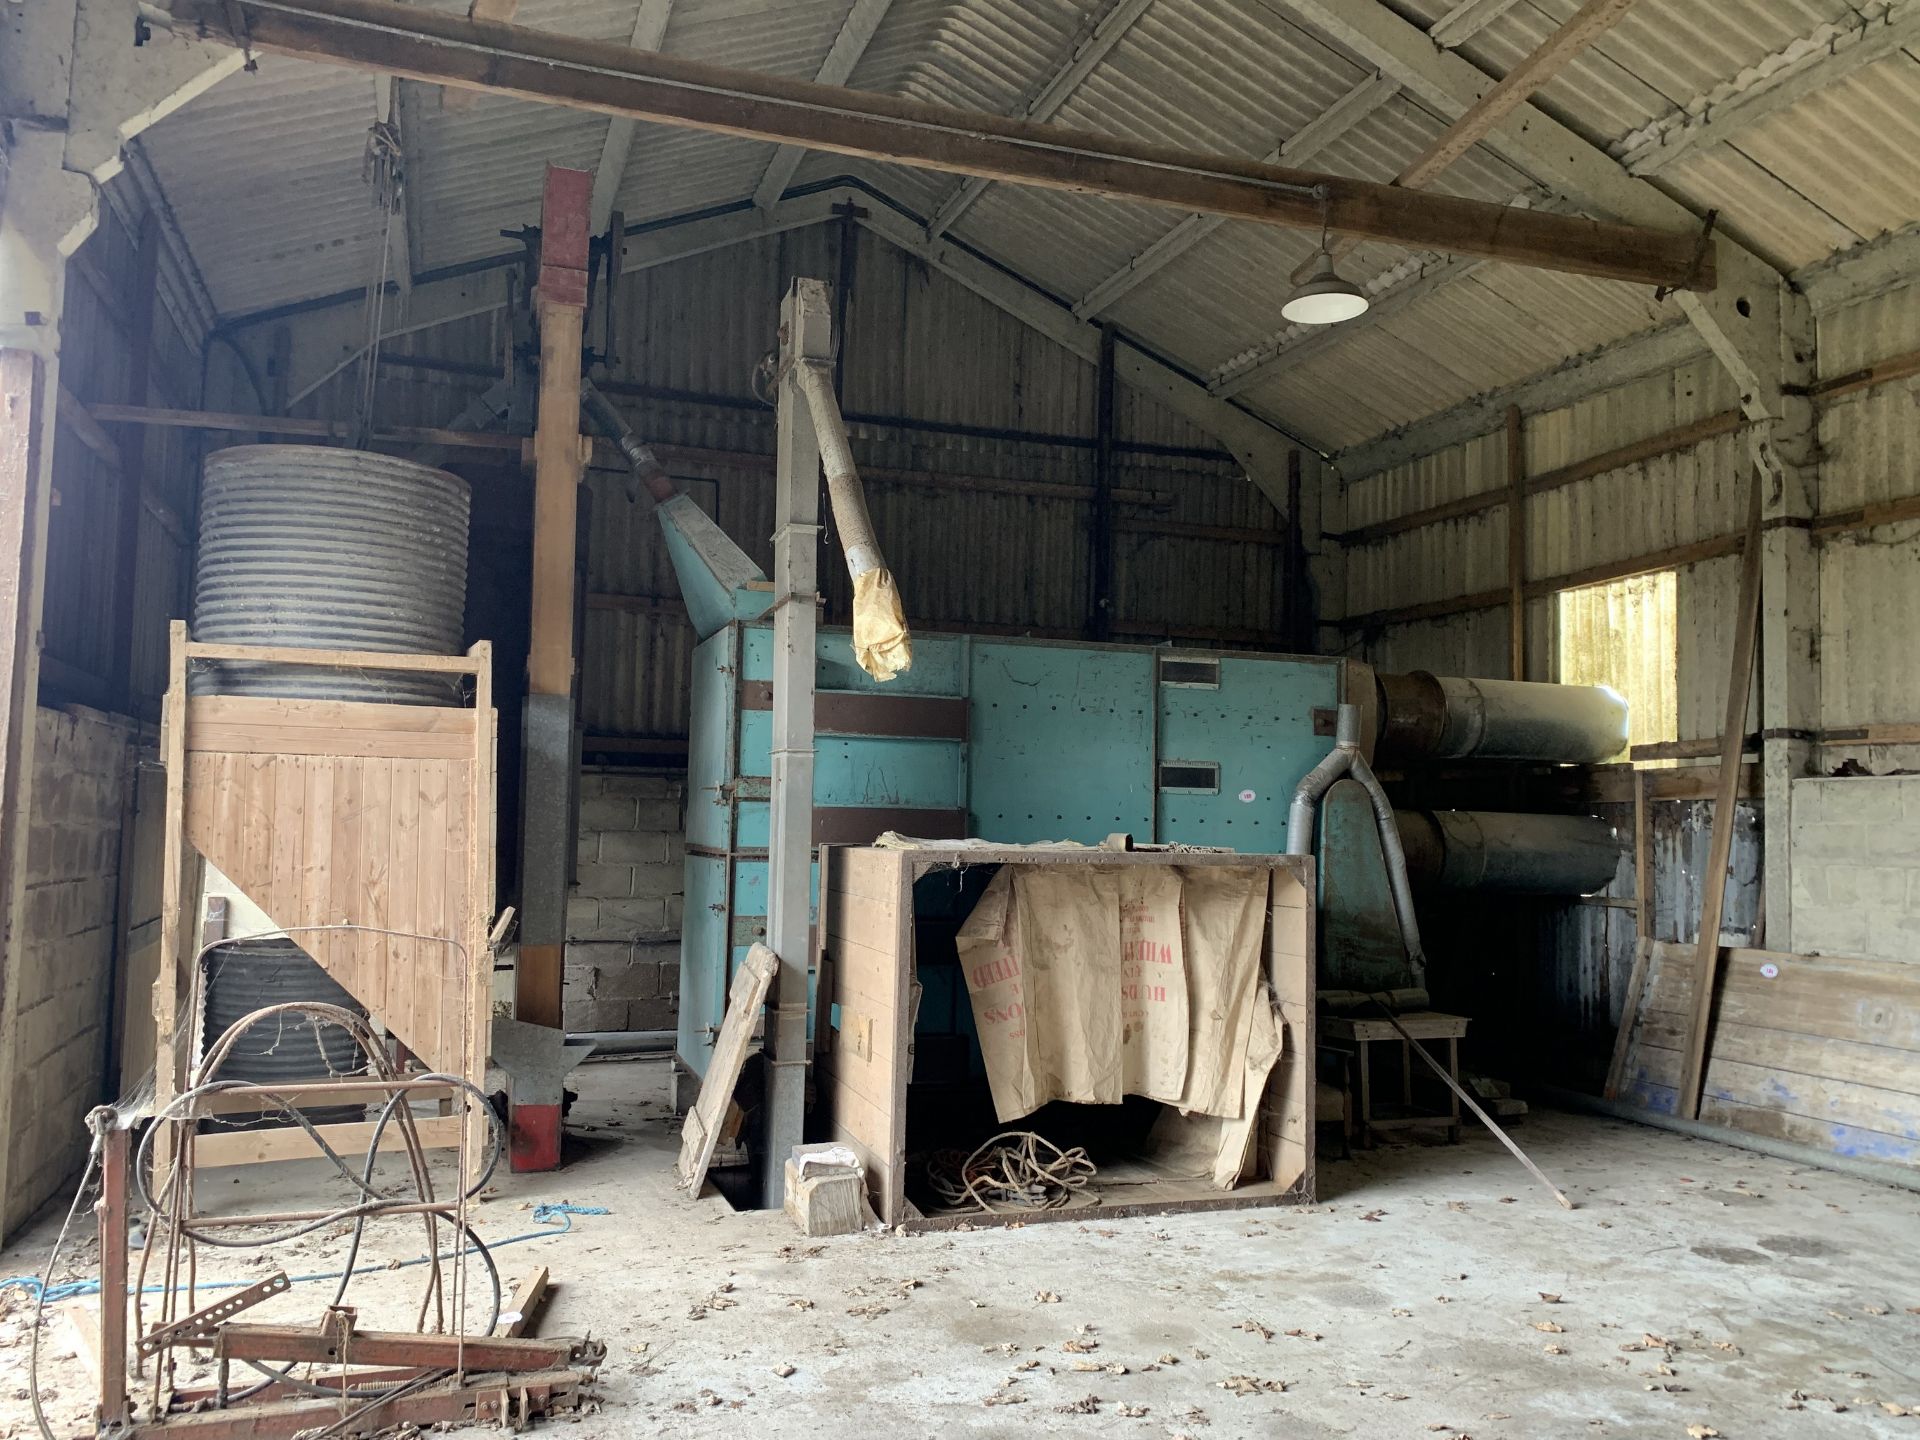 Corn dryer system, purchaser to remove